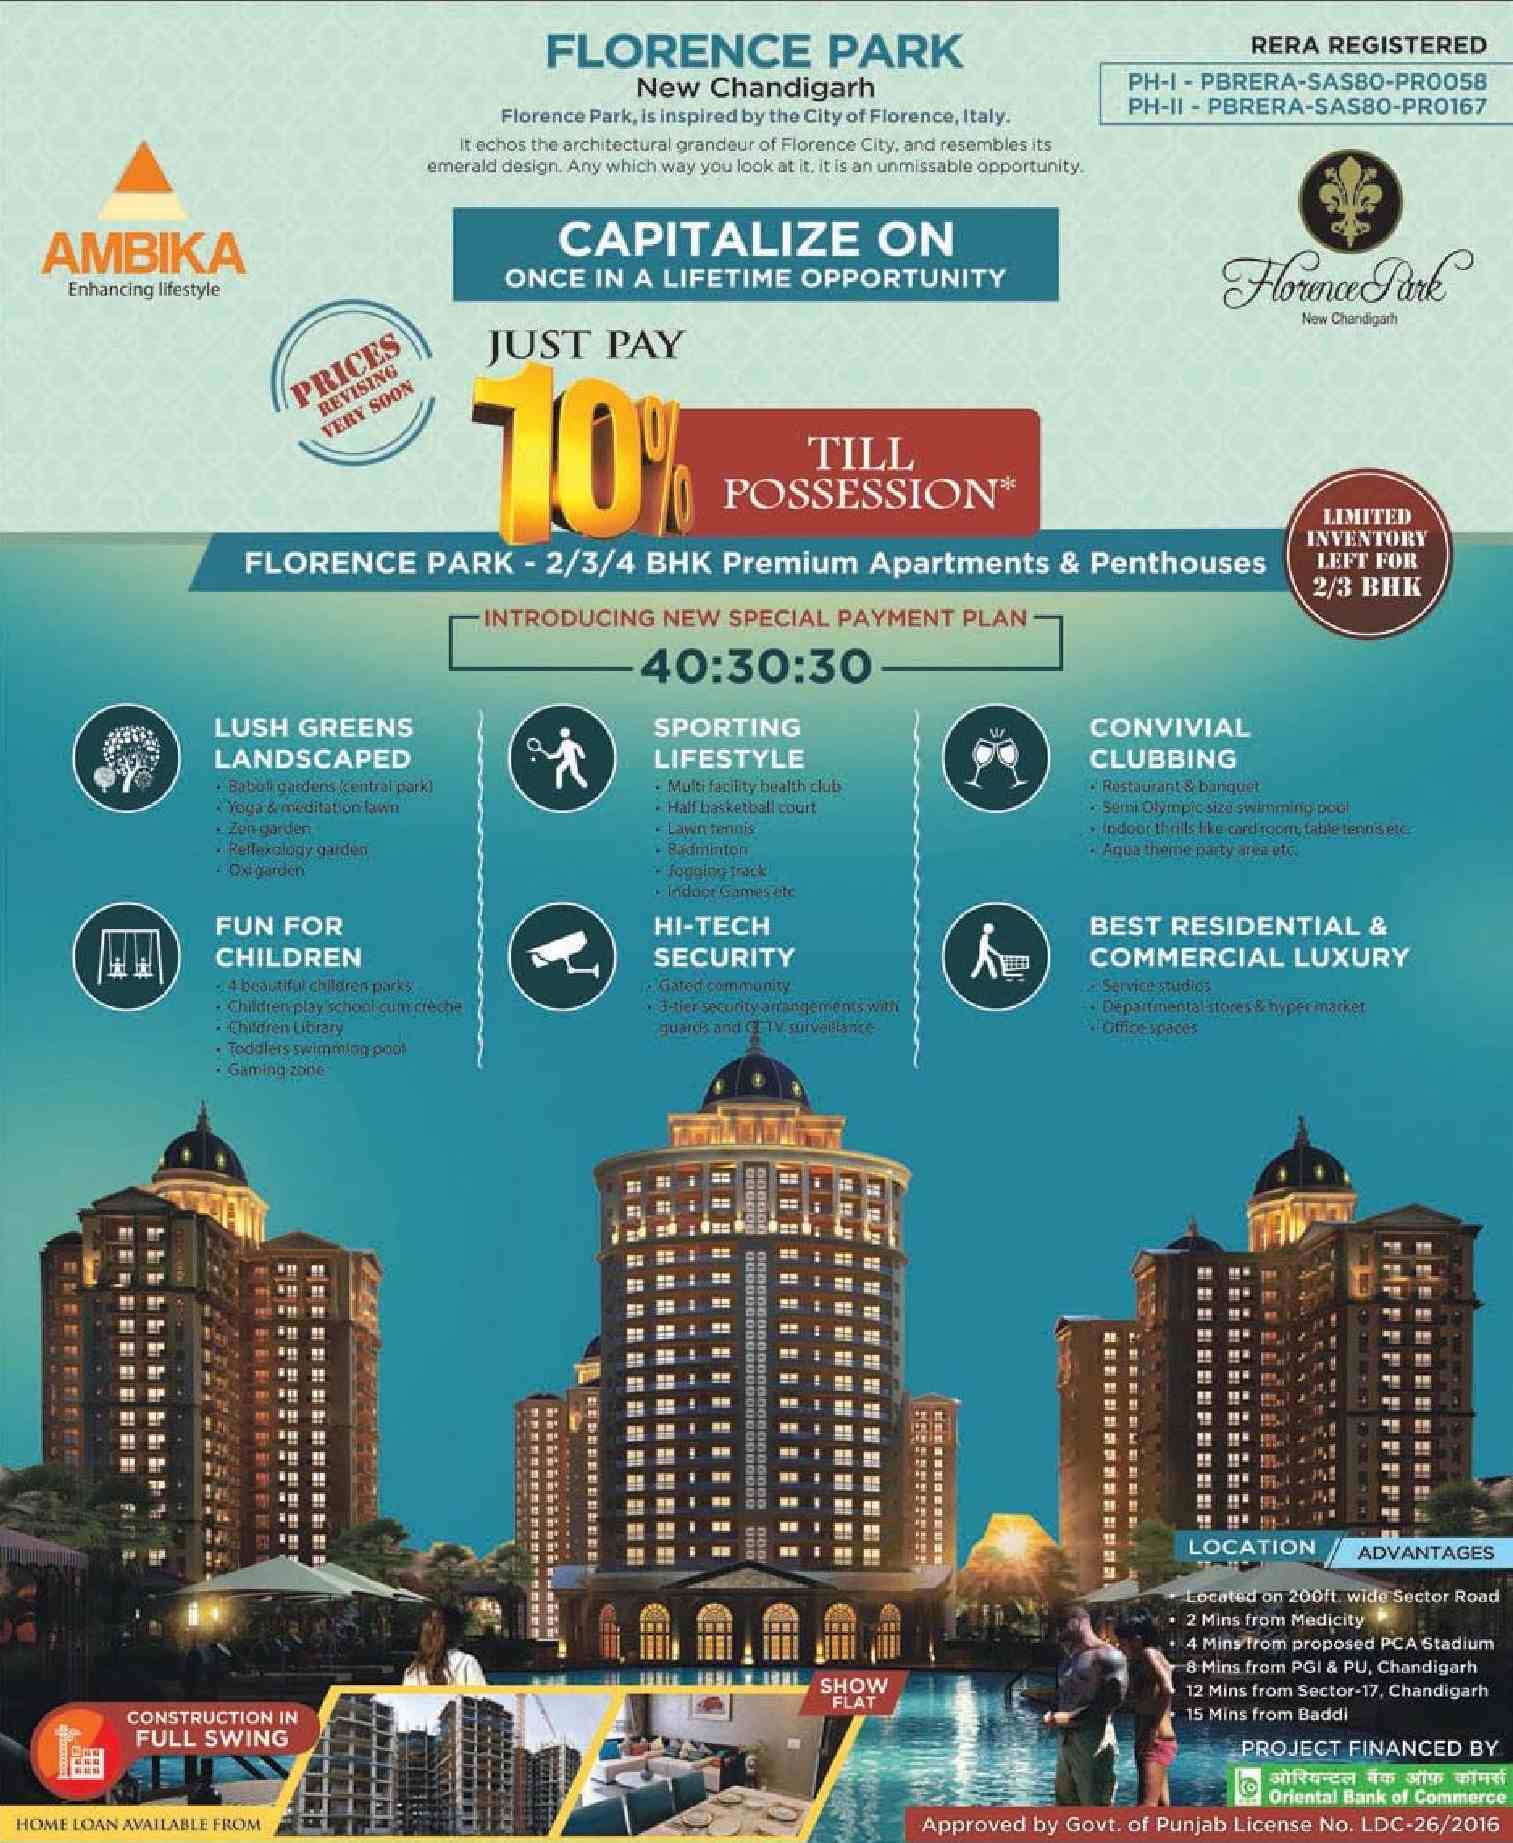 Just pay 10% till possession at Ambika Florence Park in Chandigarh Update